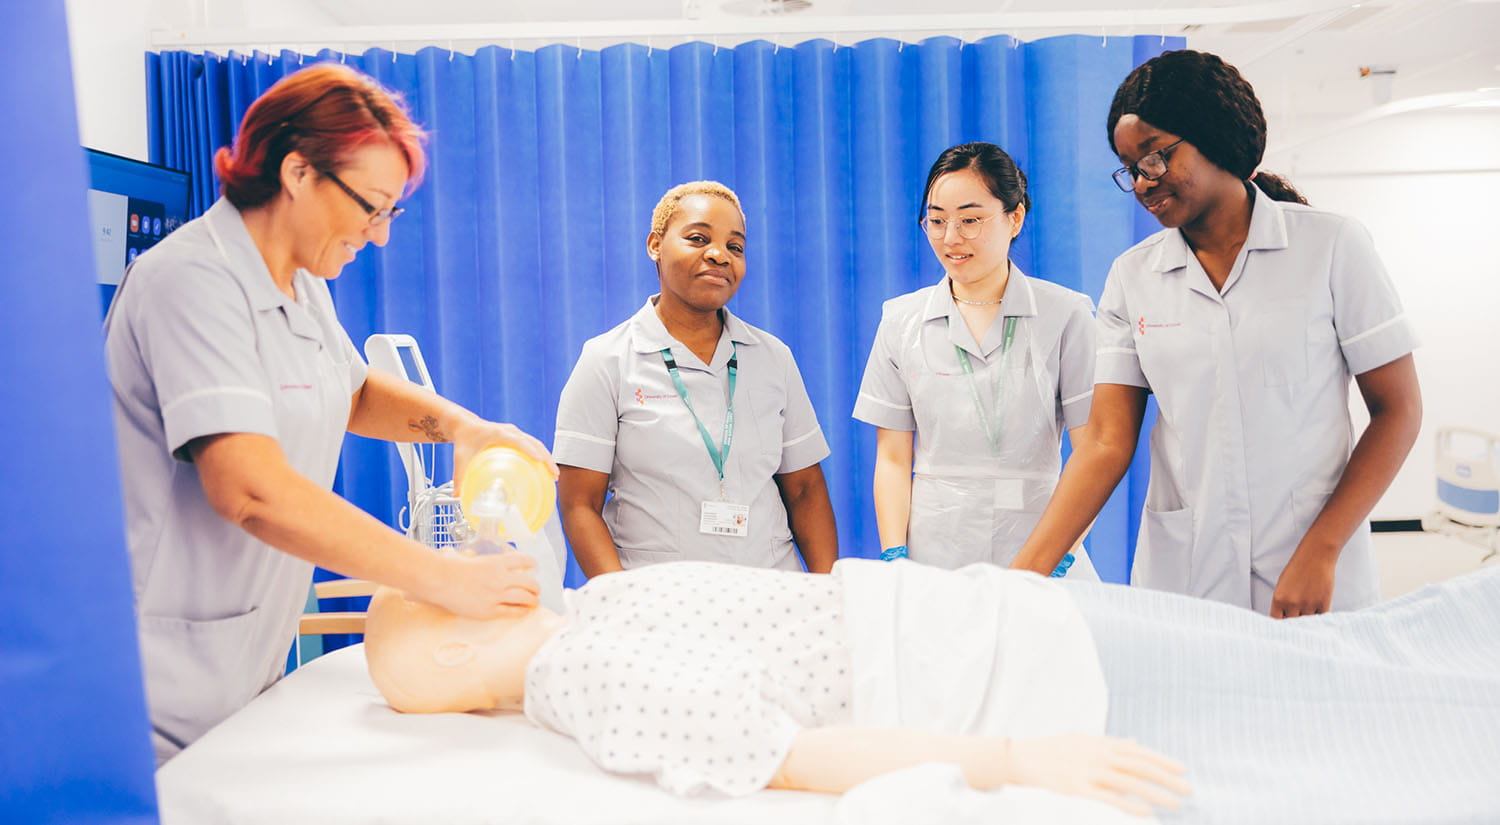 Nursing students practising patient care on a training manikin